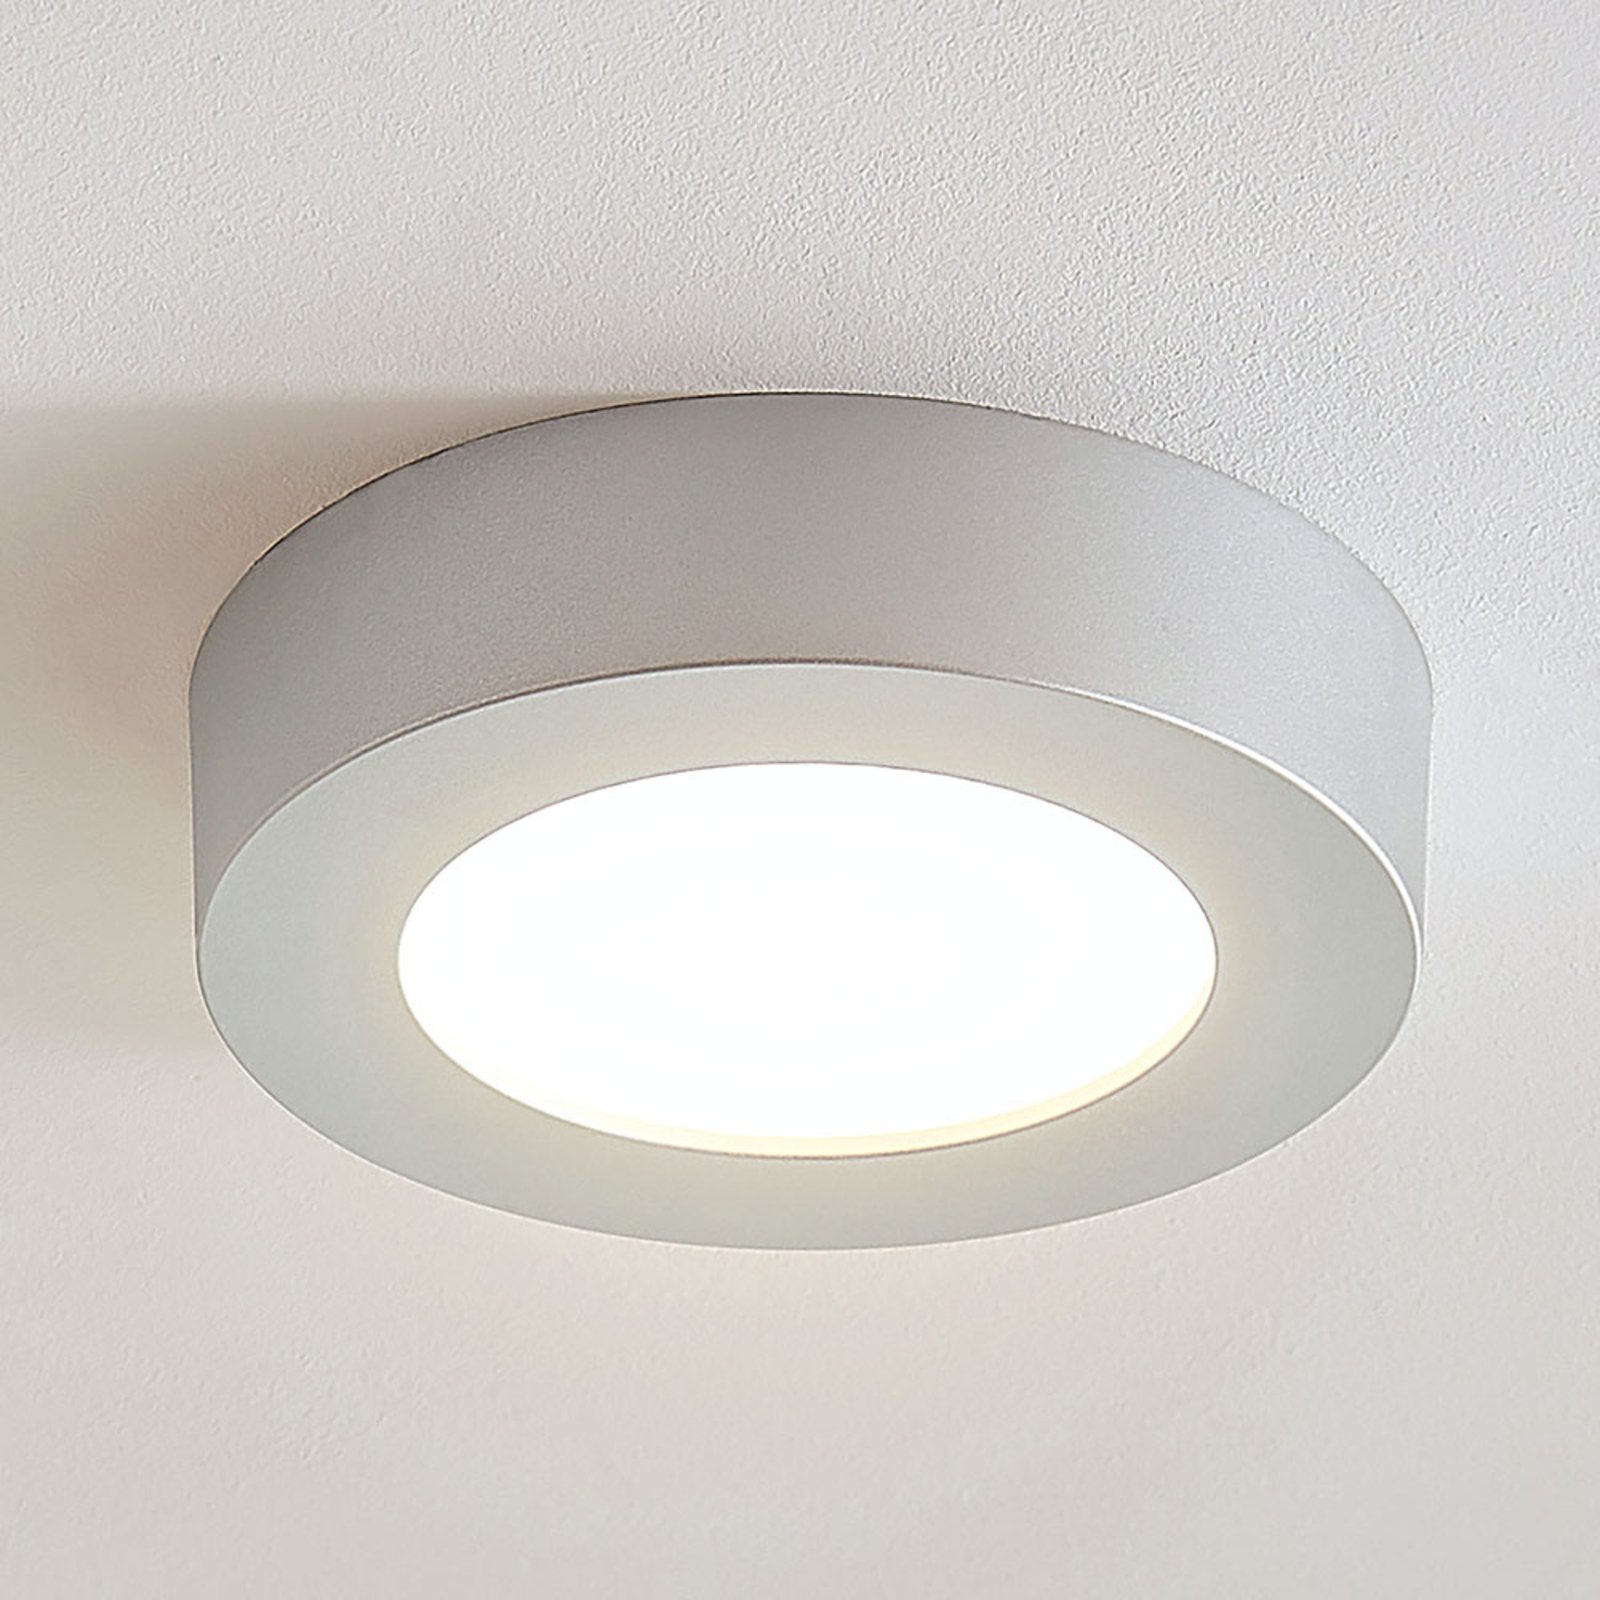 Marlo LED ceiling lamp silver 3000 K round 18.2 cm_9978052_1